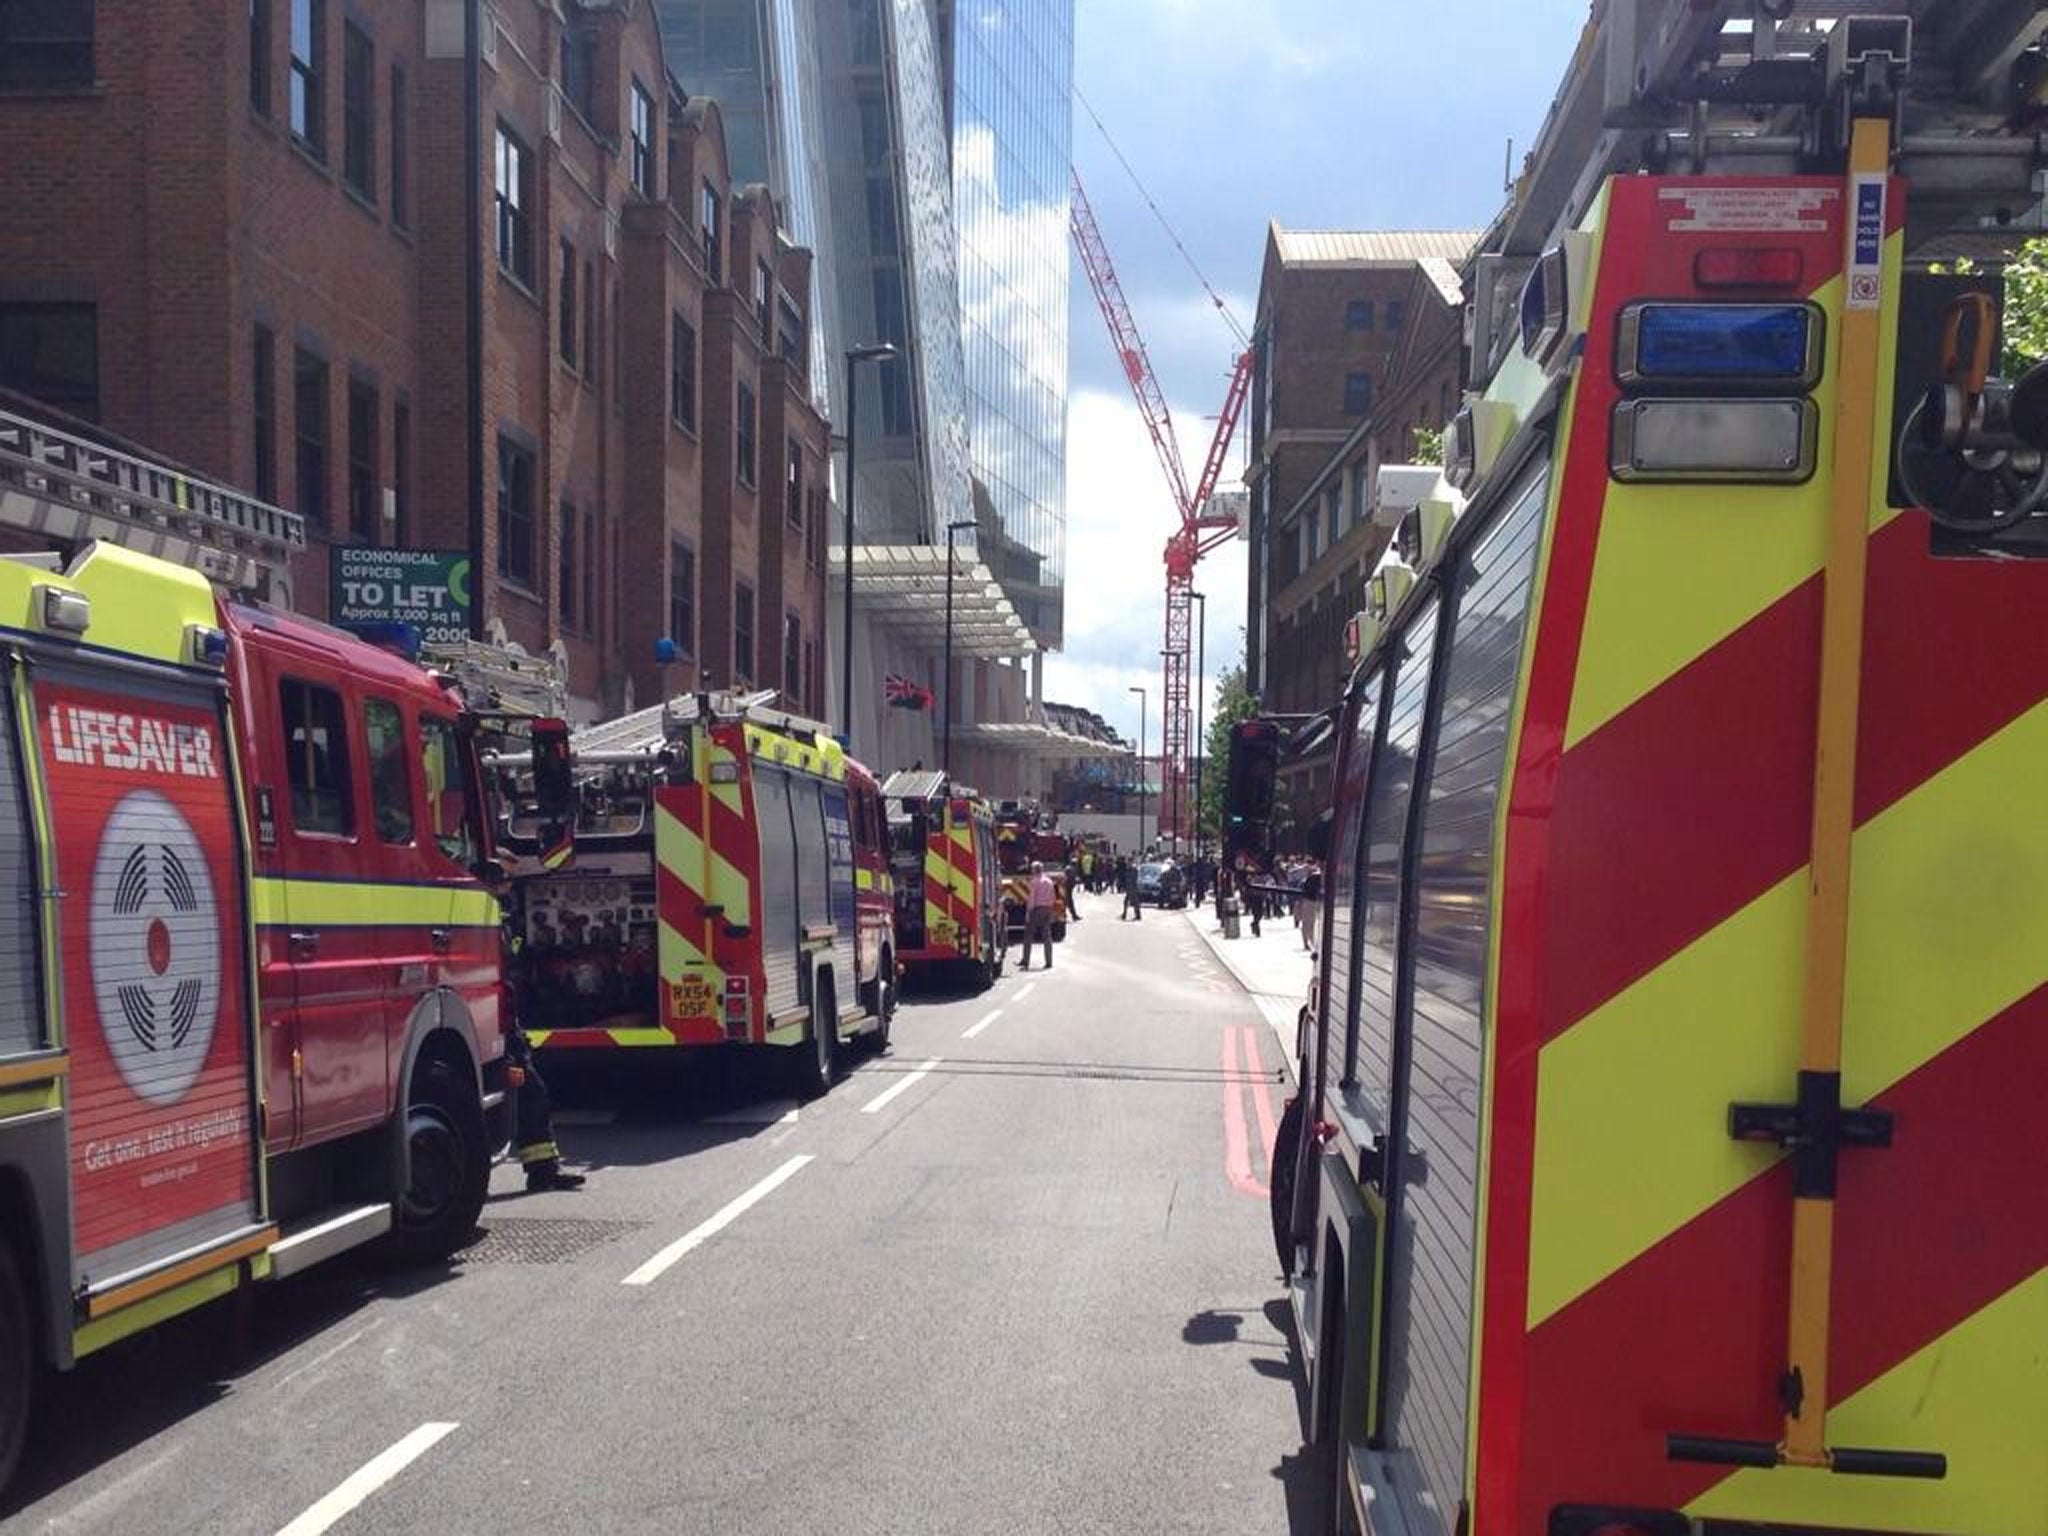 Witnesses outside the Shard praised the rapid response from fire services, which are investigating reports of smoke in the basement